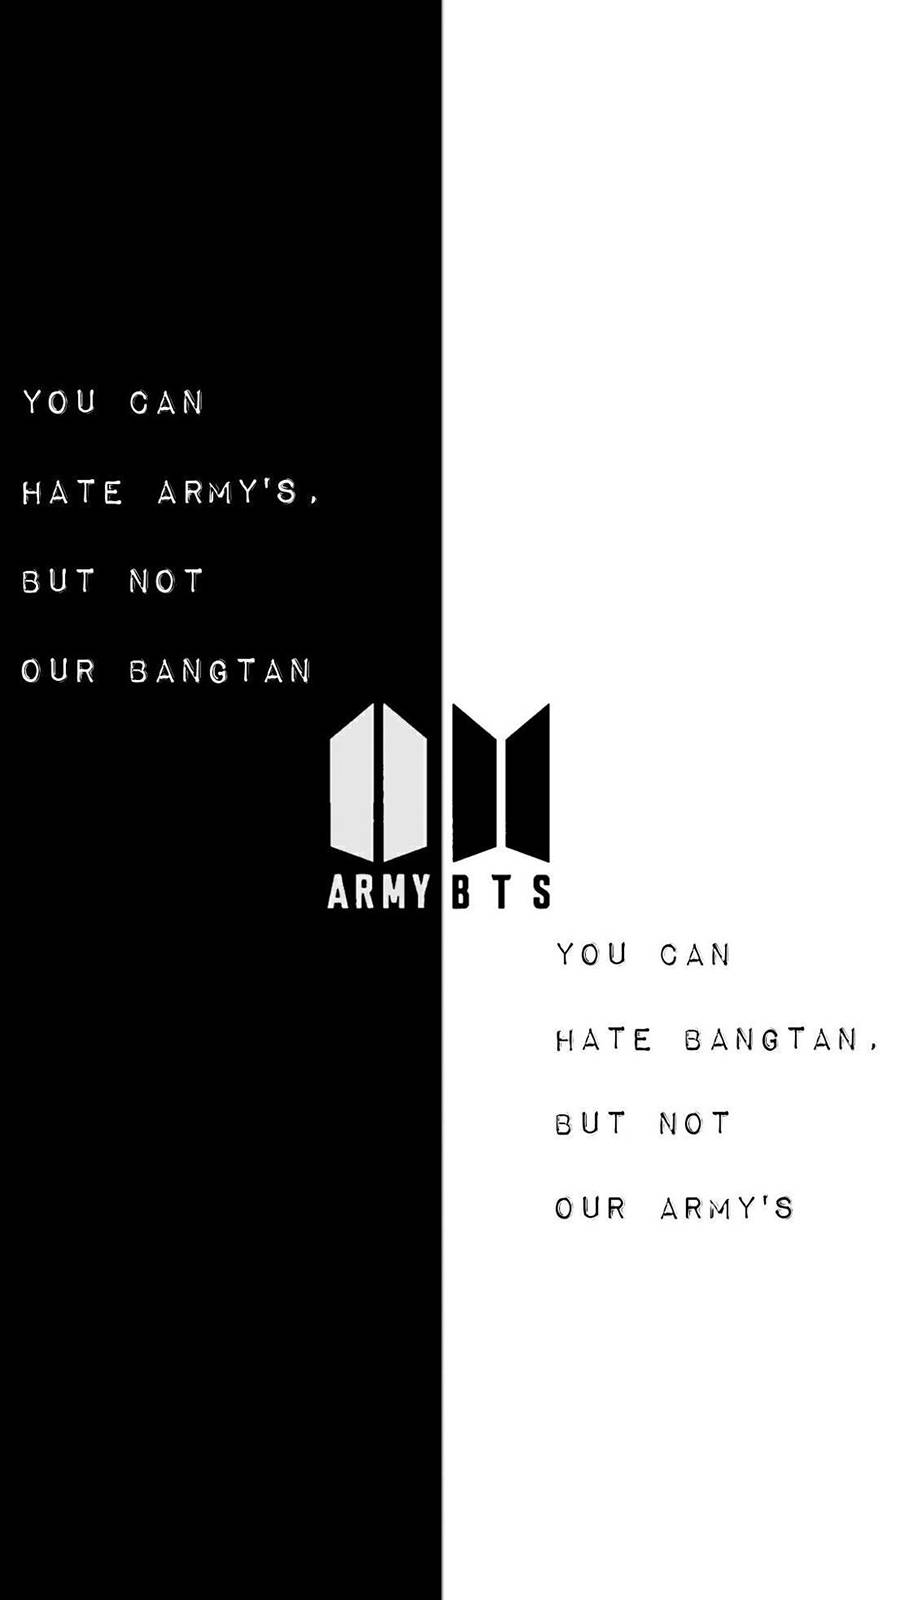 Bts Logo In Black And White Background